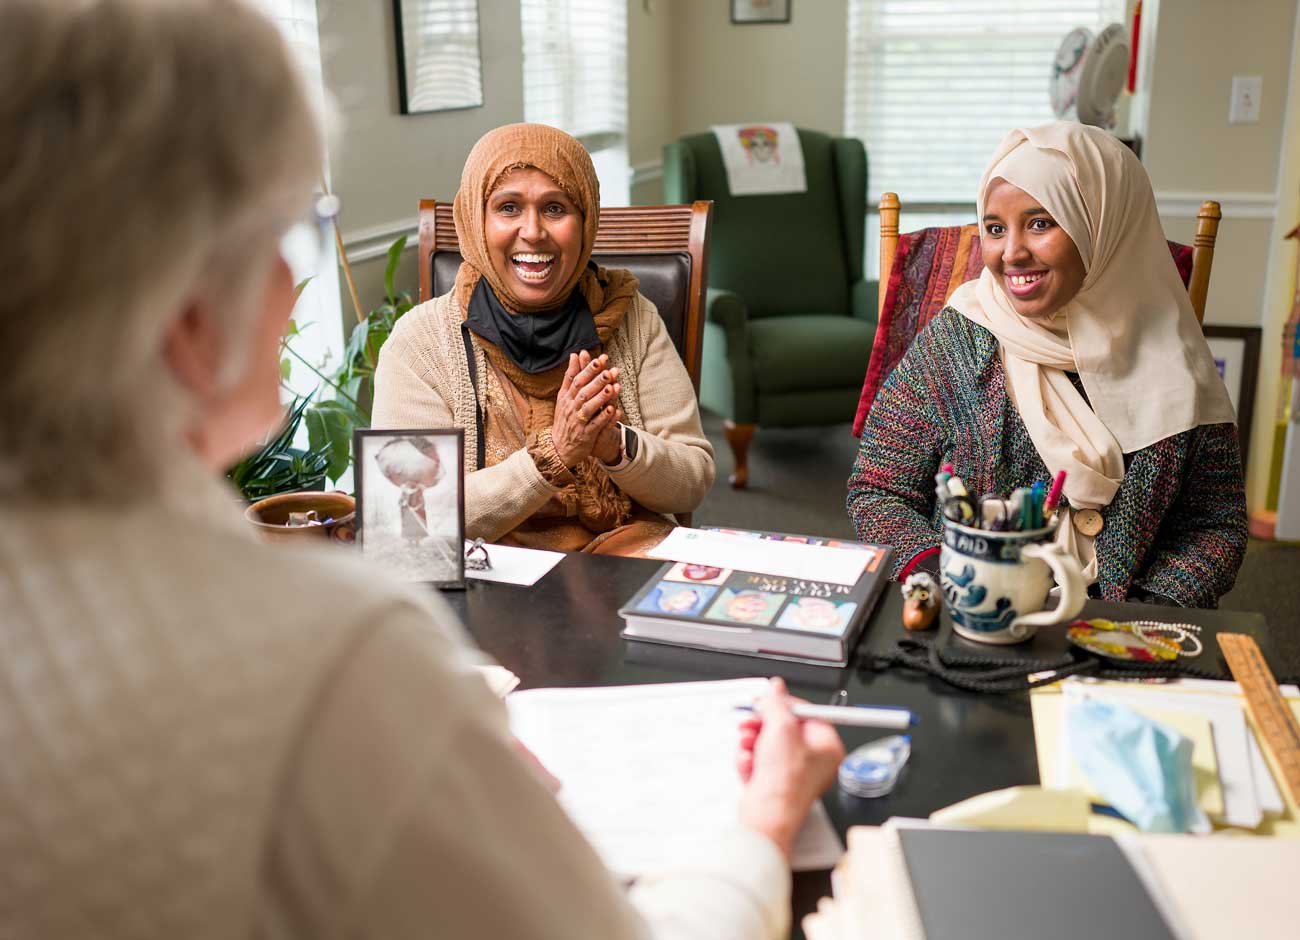 two women sit in an office smiling while talking to another woman across a table. The two women are of African descent and wearing head scarves. A pile of paperwork sits on the desk.